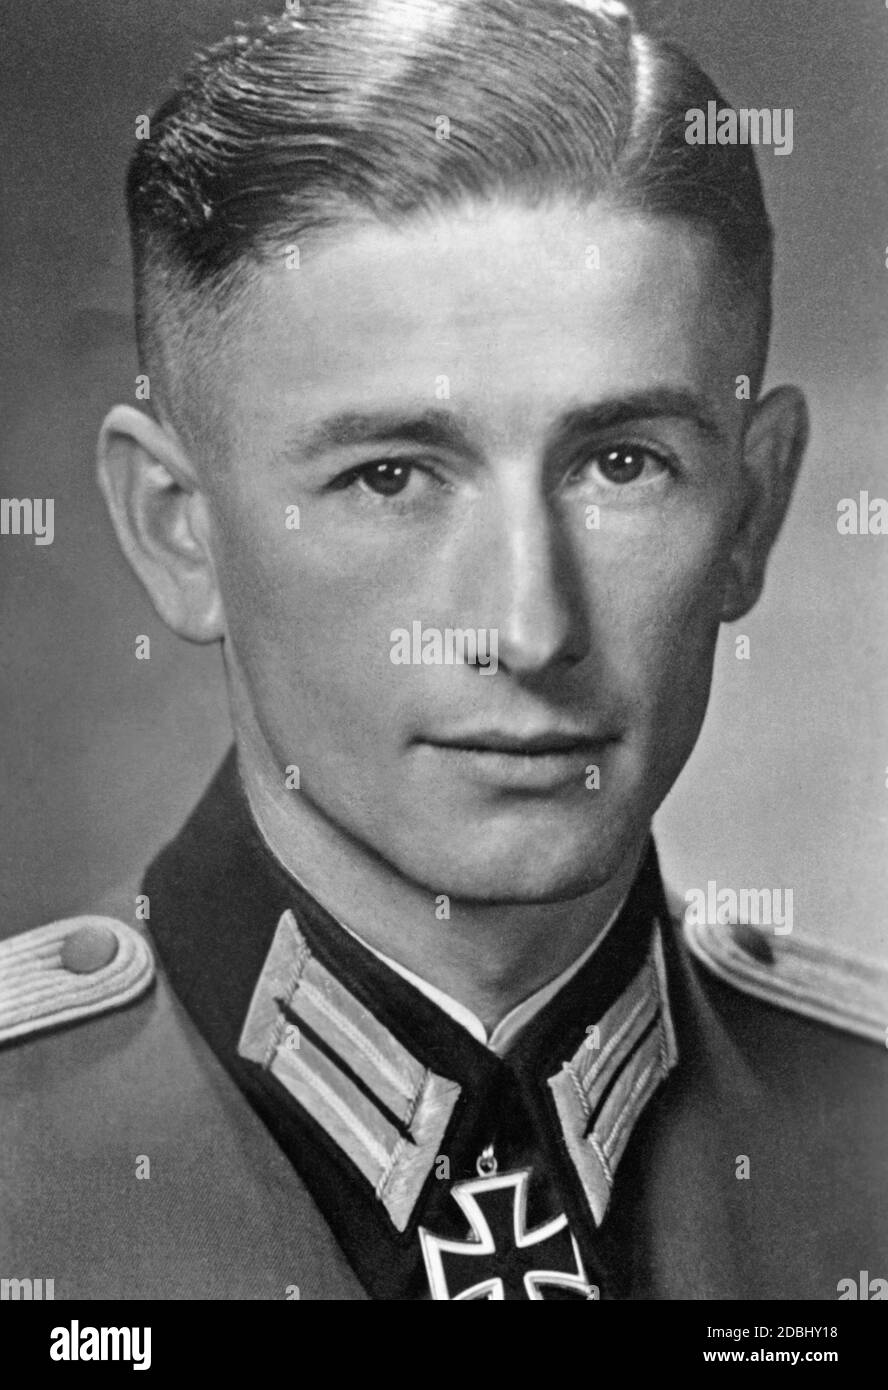 First Lieutenant Hans Barthle, 7./Grenadierregiment 119 (mot), with the Knight's Cross in 1940. The date is the bestowal date. Stock Photo